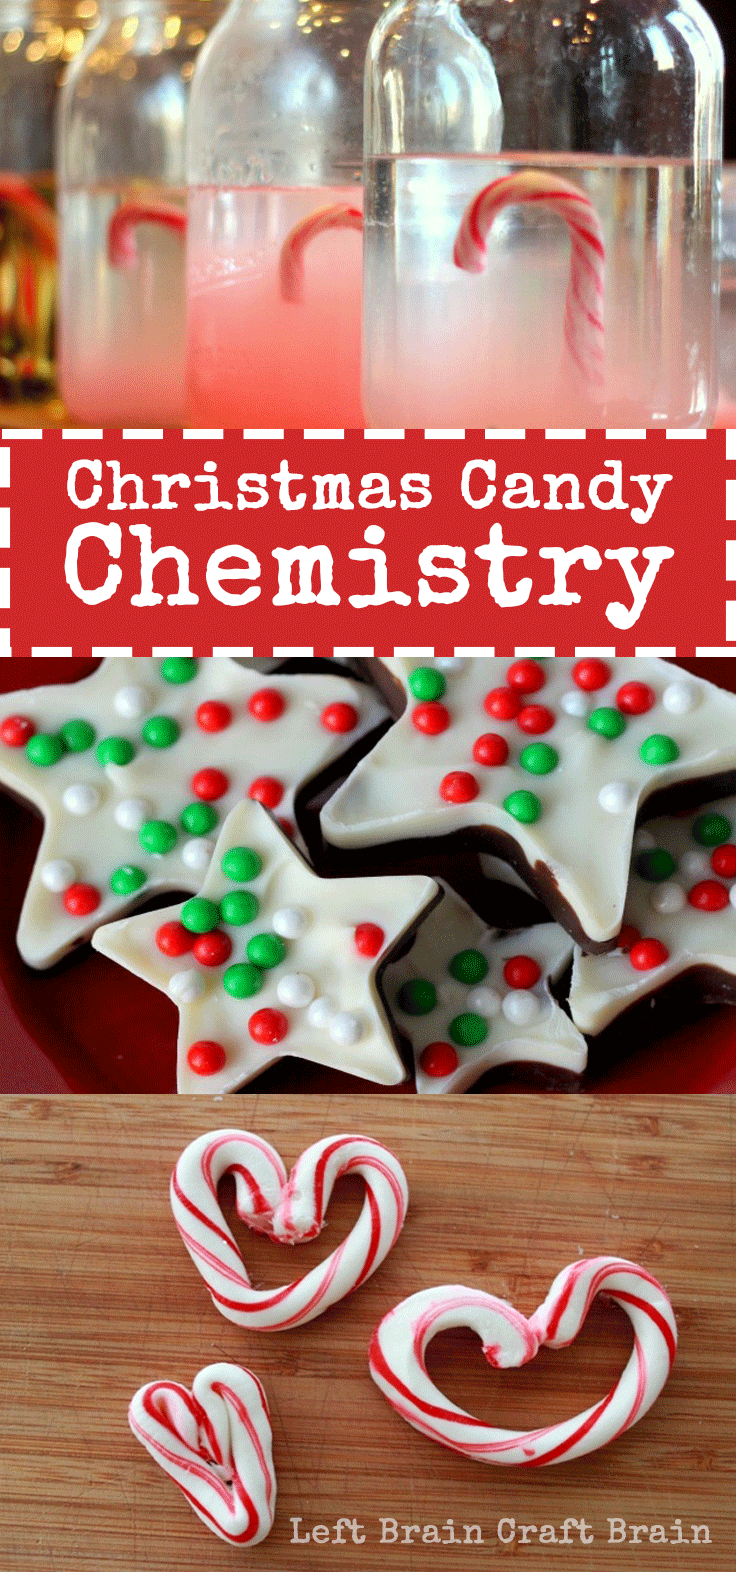 Have some science fun with all that yummy Christmas candy. It's STEM learning made fun and festive.